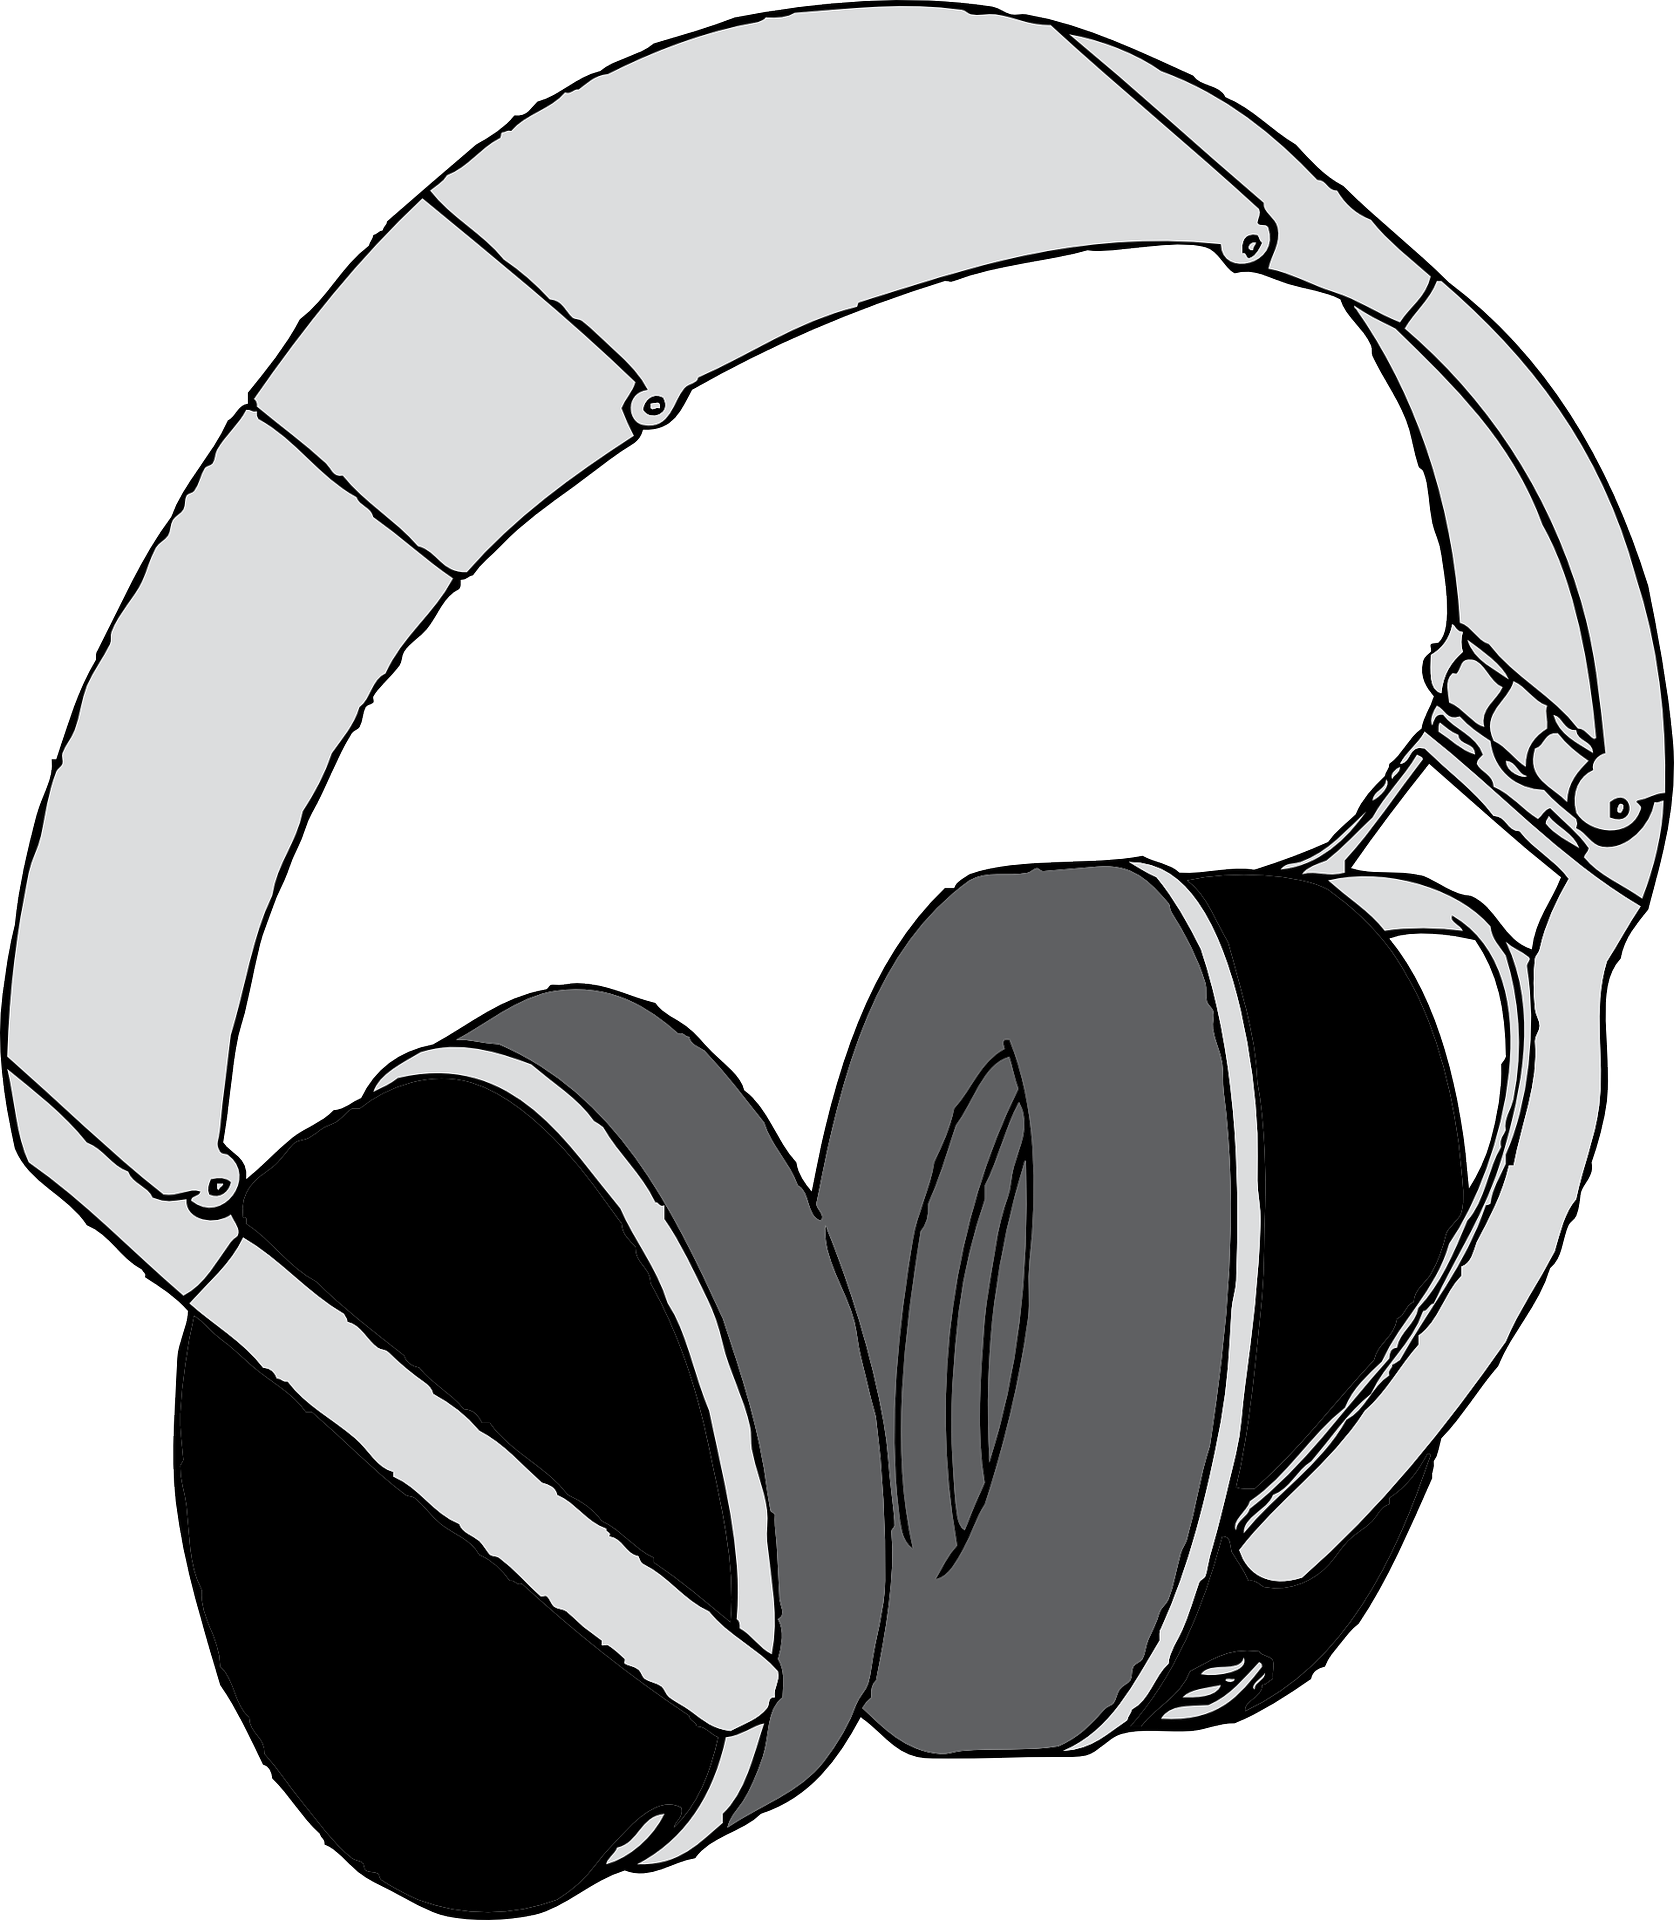 grey headphones drawing free image https pixy org licence php